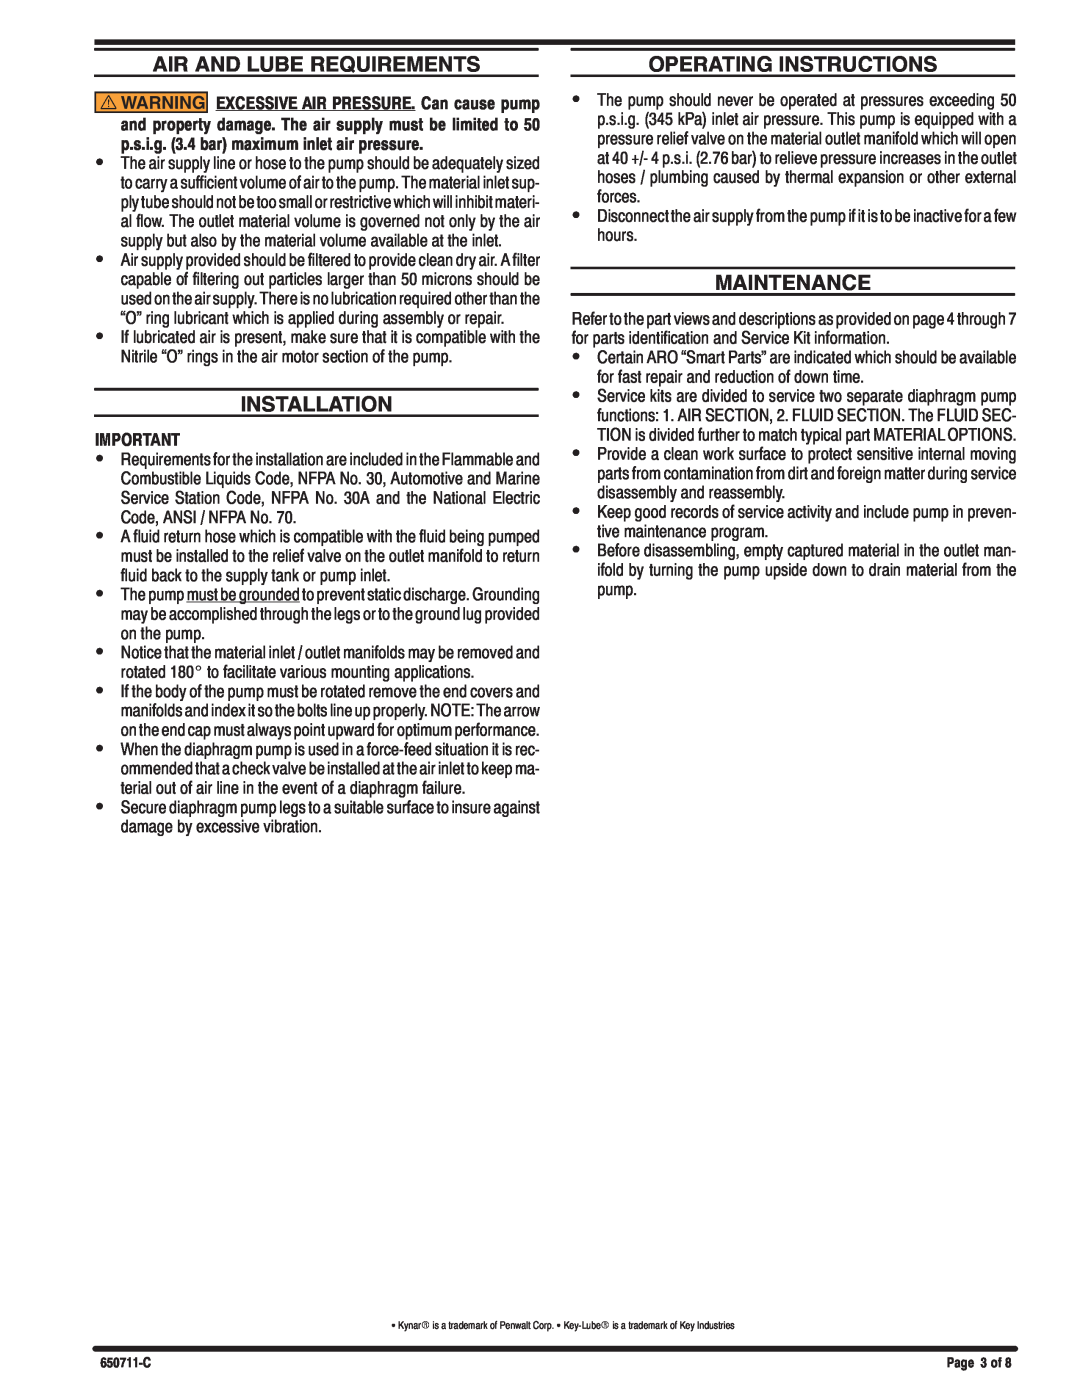 Ingersoll-Rand 650711-C manual Air And Lube Requirements, Operating Instructions, Maintenance, Installations, S Rs R, S S S 